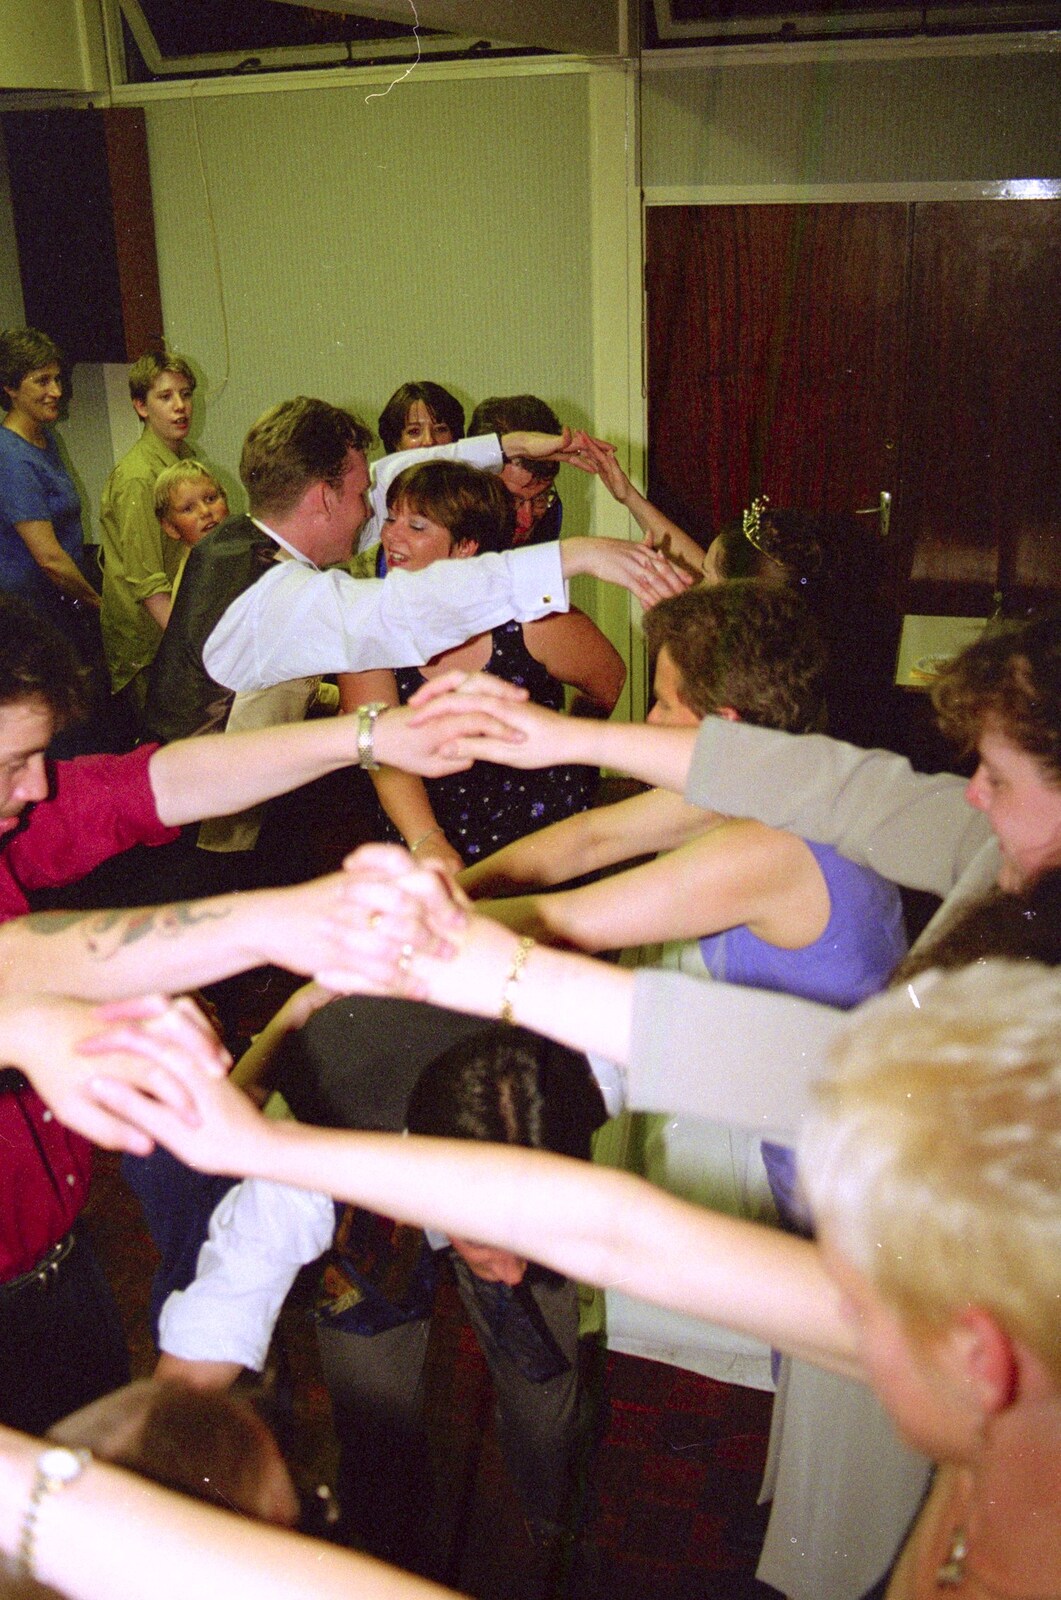 Linked hands form a guard of honour from Joe and Lesley's CISU Wedding, Ipswich, Suffolk - 30th July 1998